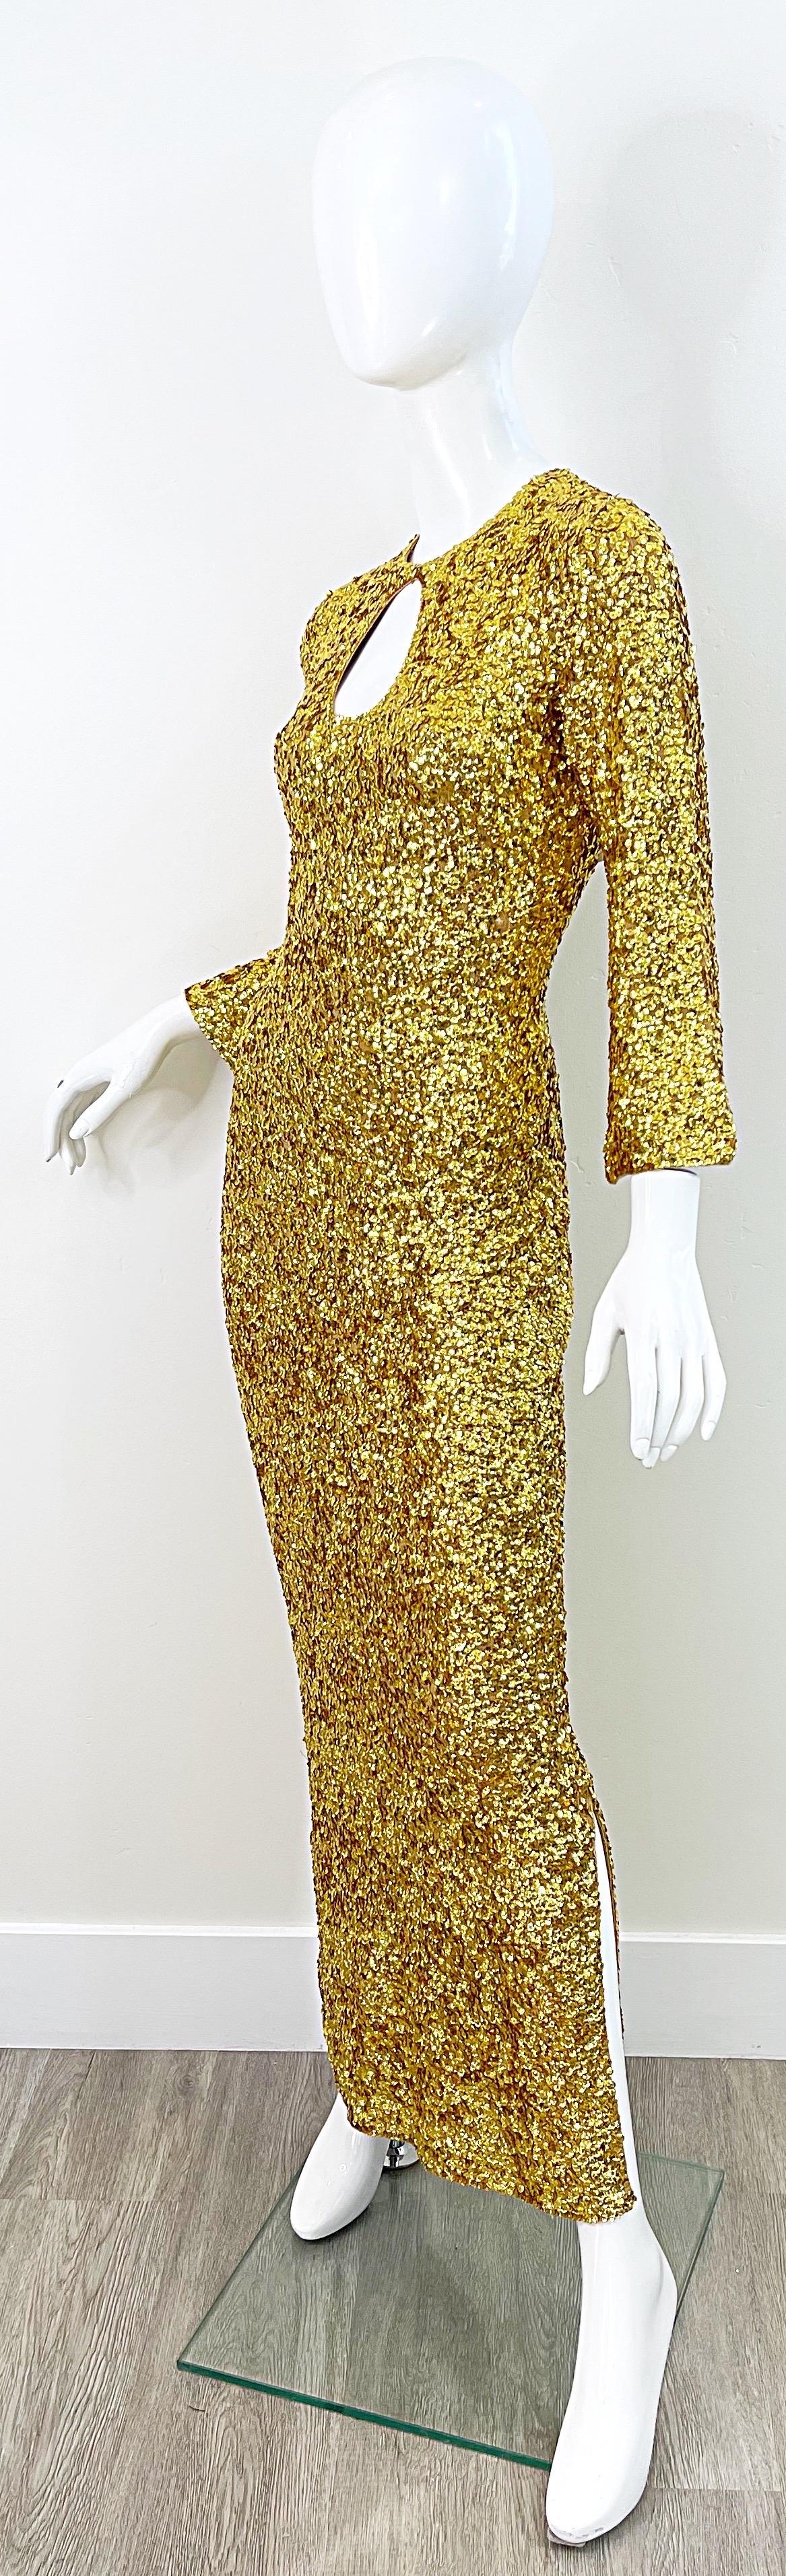 1960s Gene Shelly’s Gold Sequin Keyhole Long Bell Sleeve Vintage Wool 60s Gown In Excellent Condition For Sale In San Diego, CA